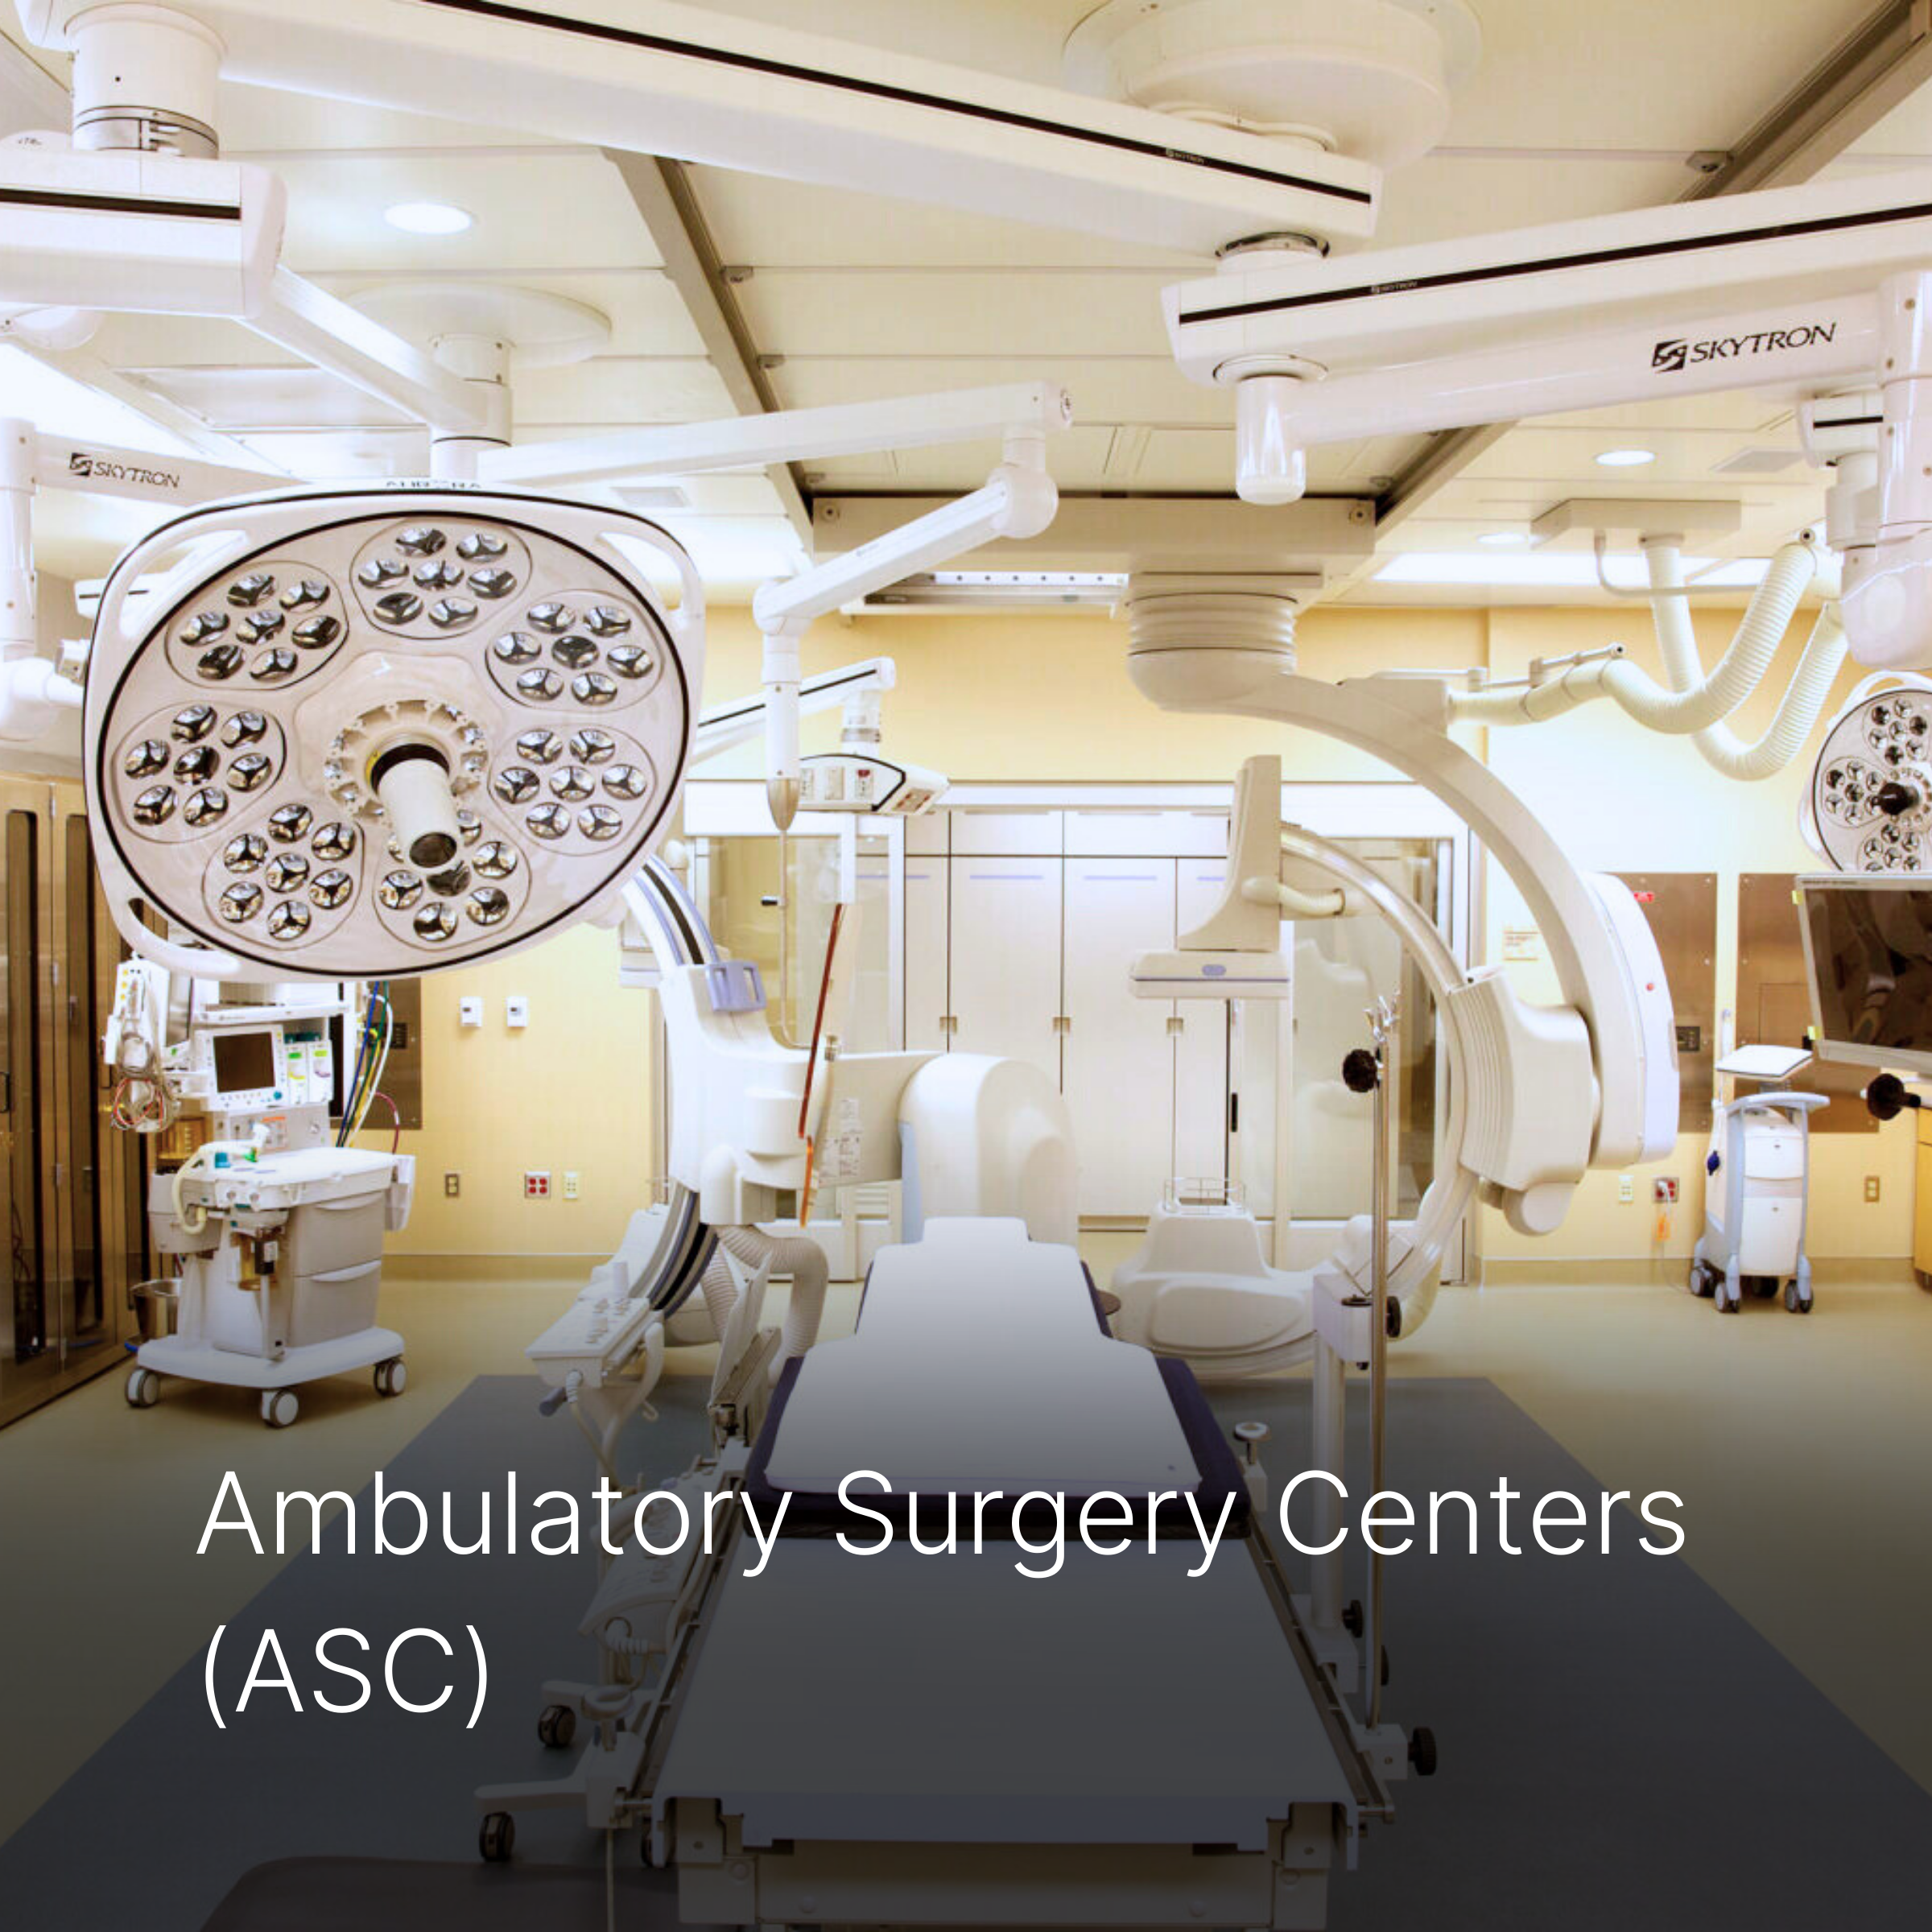 Surgery room with caption of Ambulatory Surgery Centers (ASC).